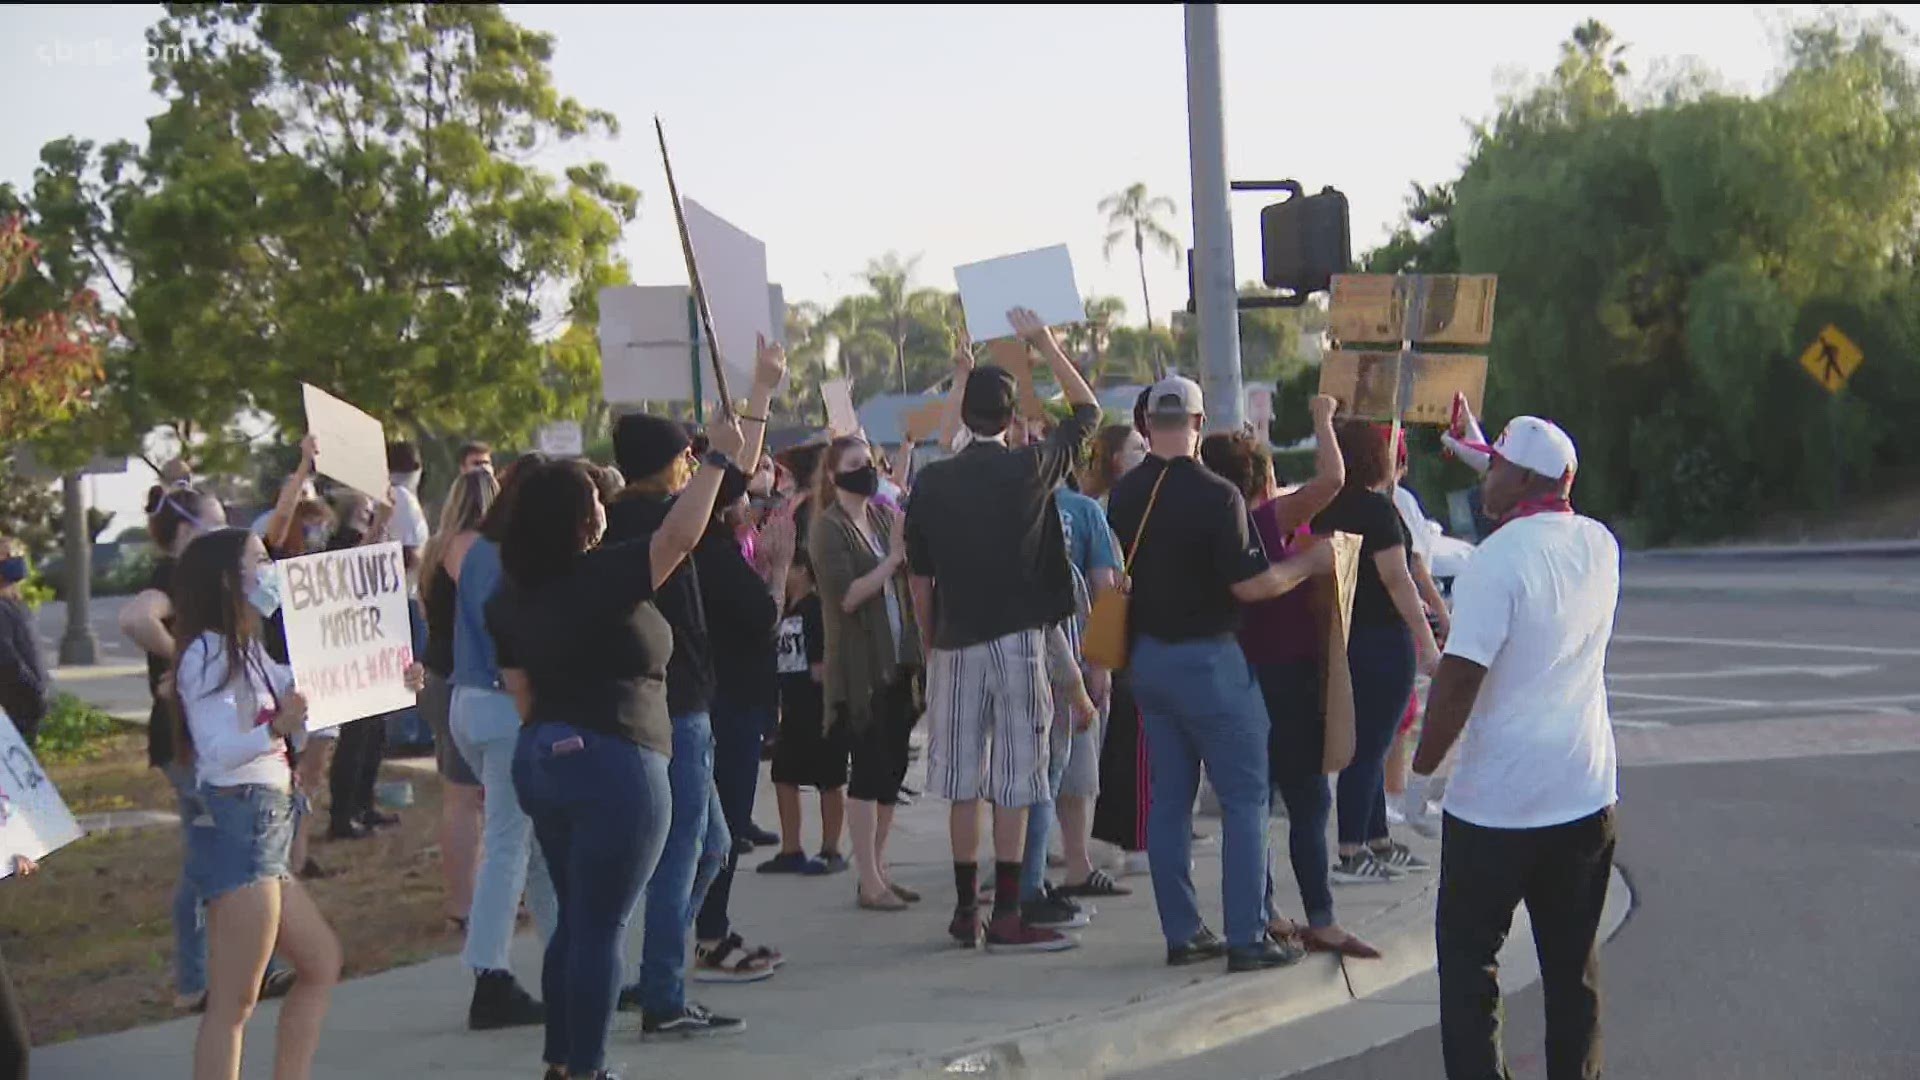 News 8 Richard Allyn has more on the San Diego protestors' perspective on the national level, as well as Gov. Newsom response.